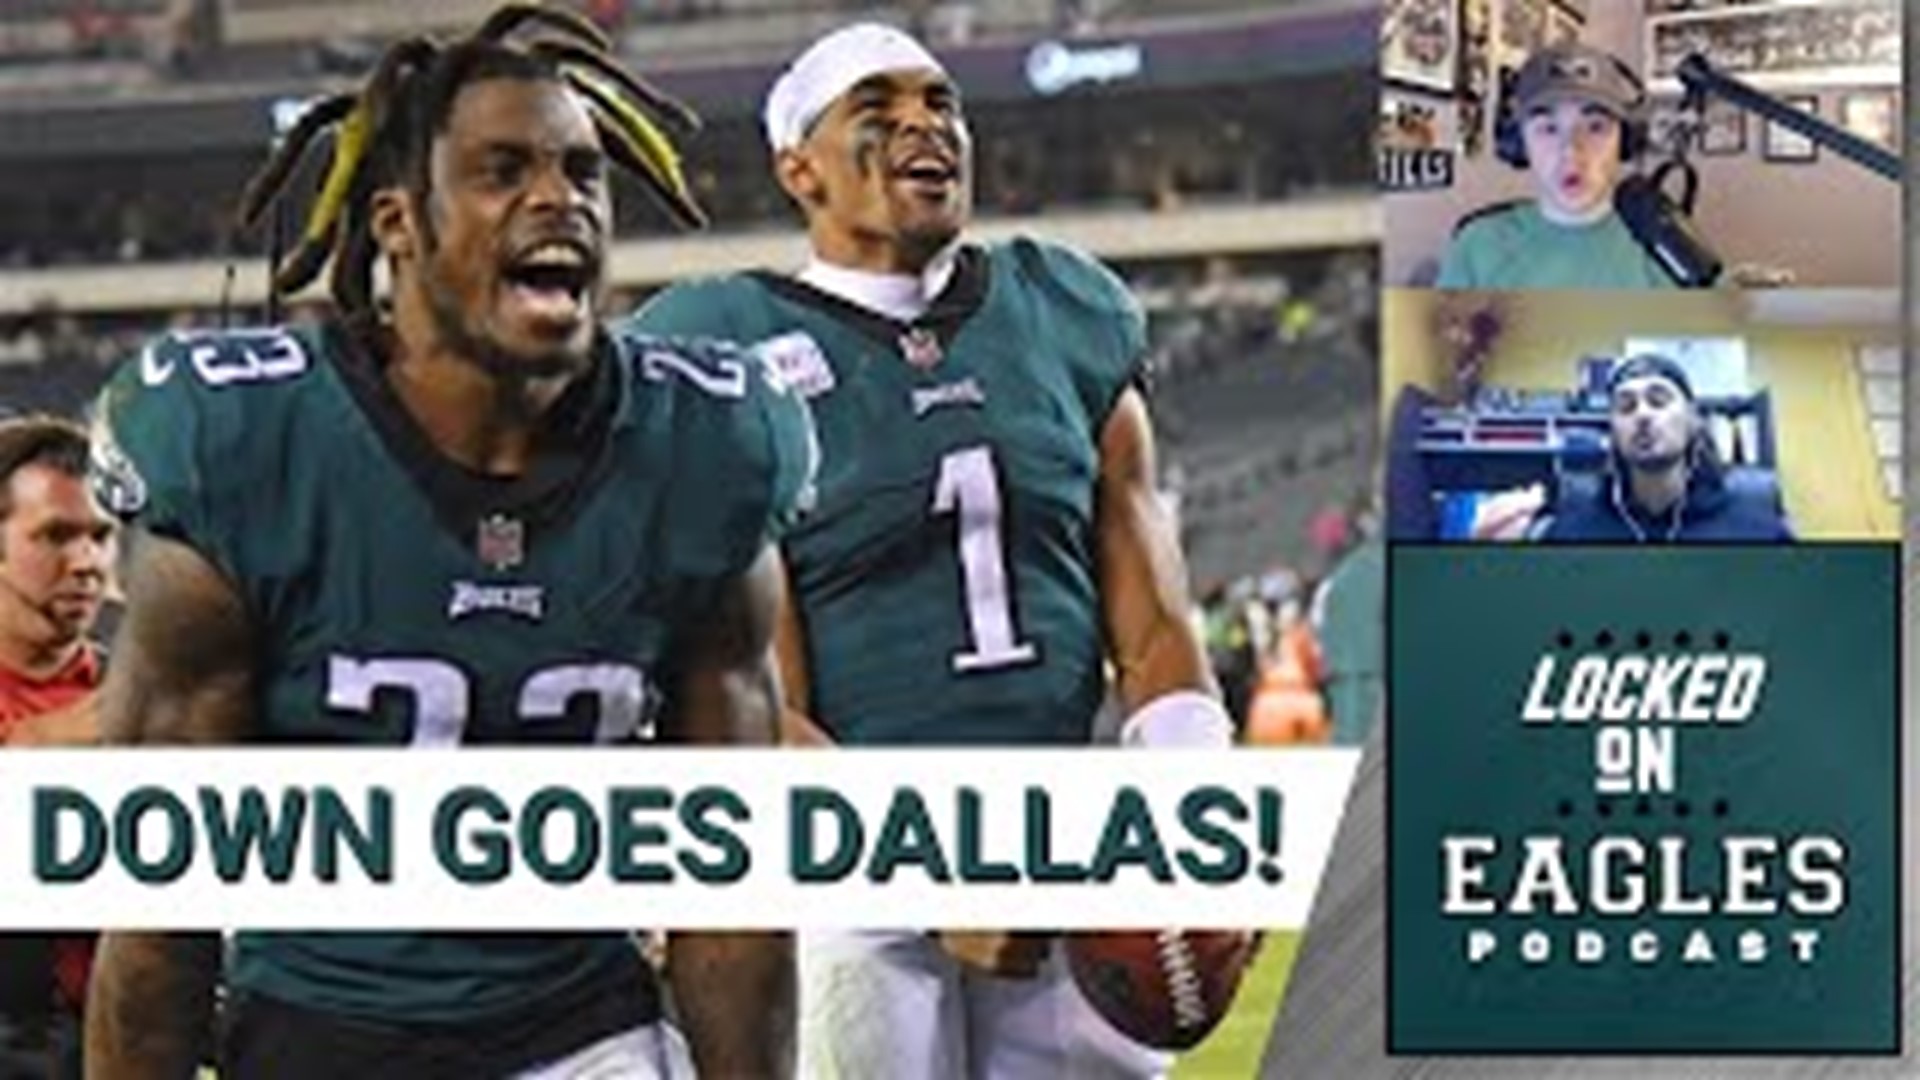 The Philadelphia Eagles kept their undefeated season alive Sunday night with a 26-17 win over the Dallas Cowboys!